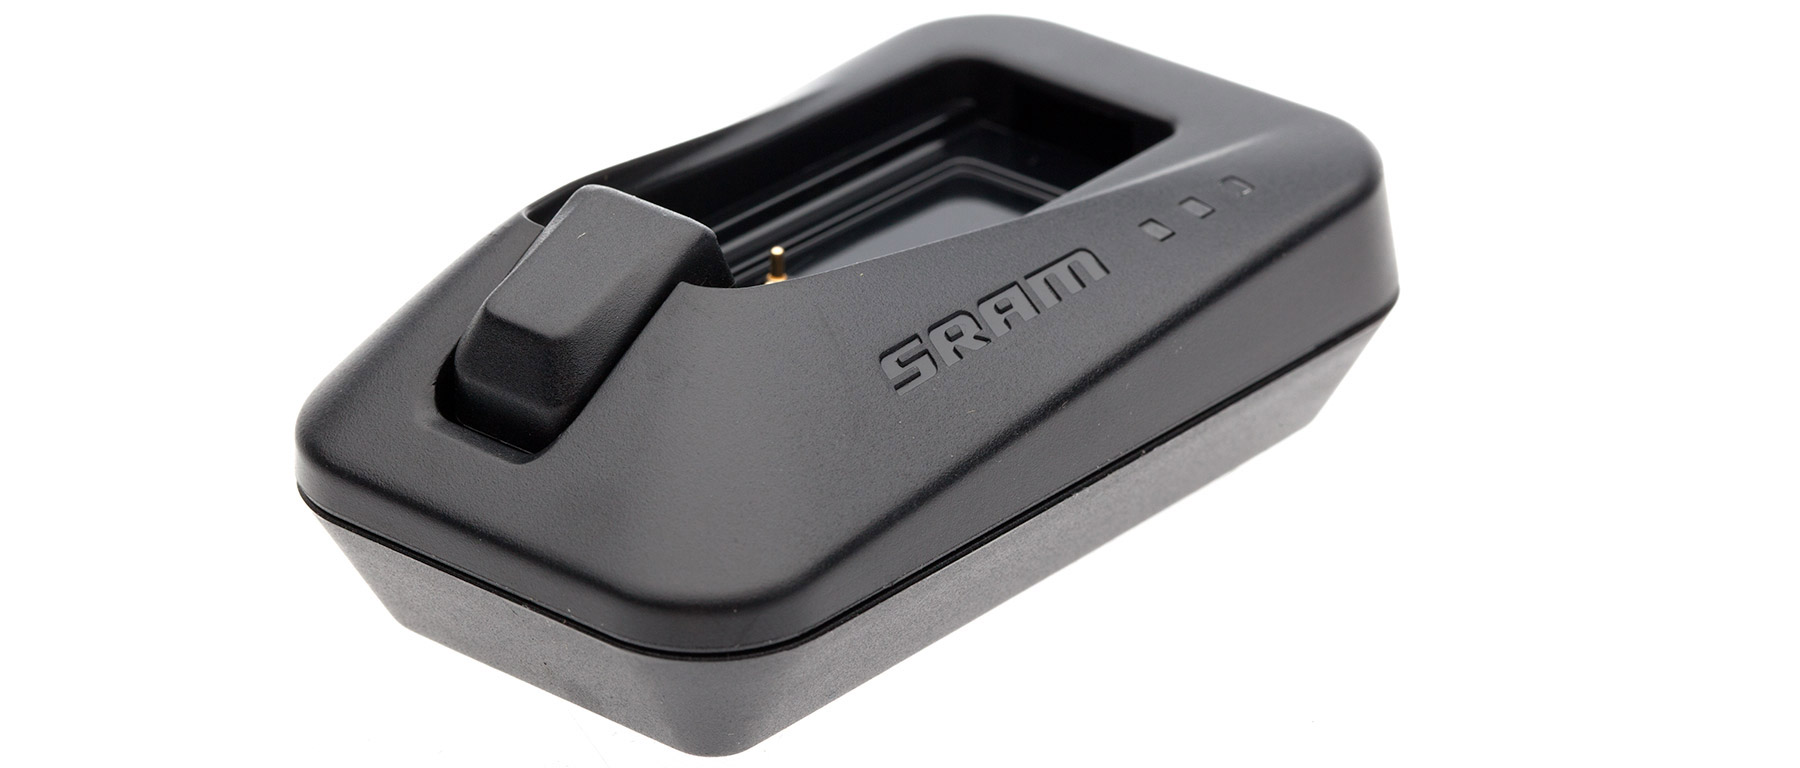 SRAM eTap AXS Battery Charger and Cord